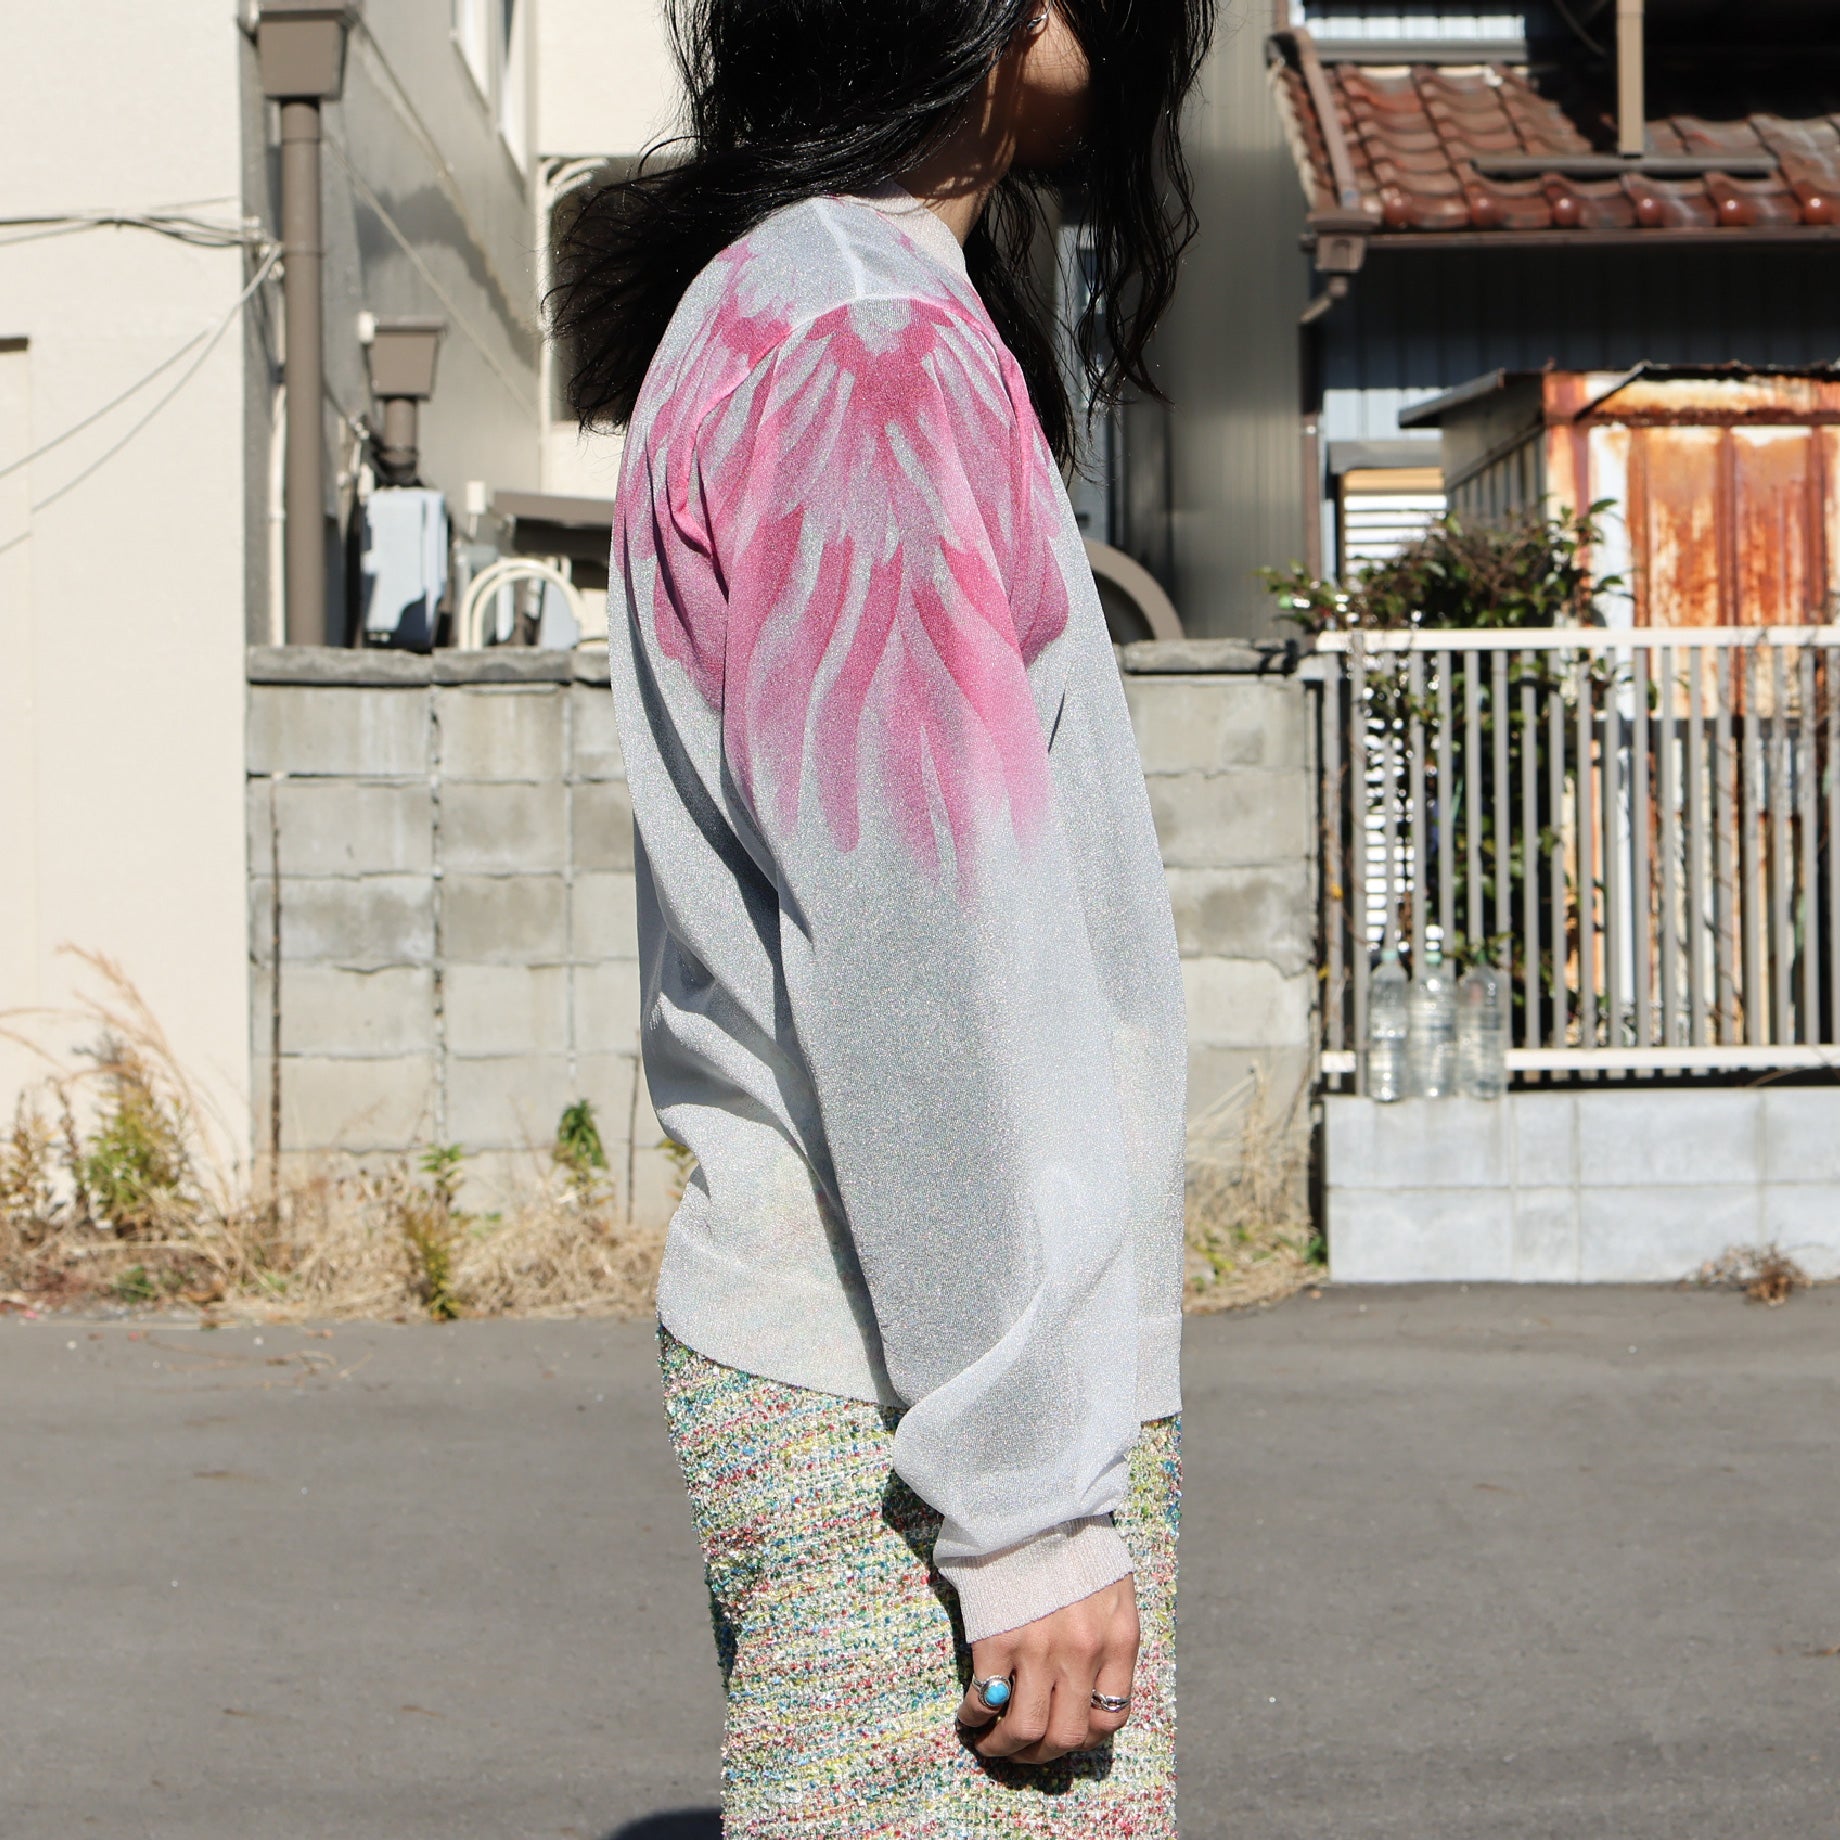 CLEAR ANGEL WING SWEATER（CLEAR WHITE）